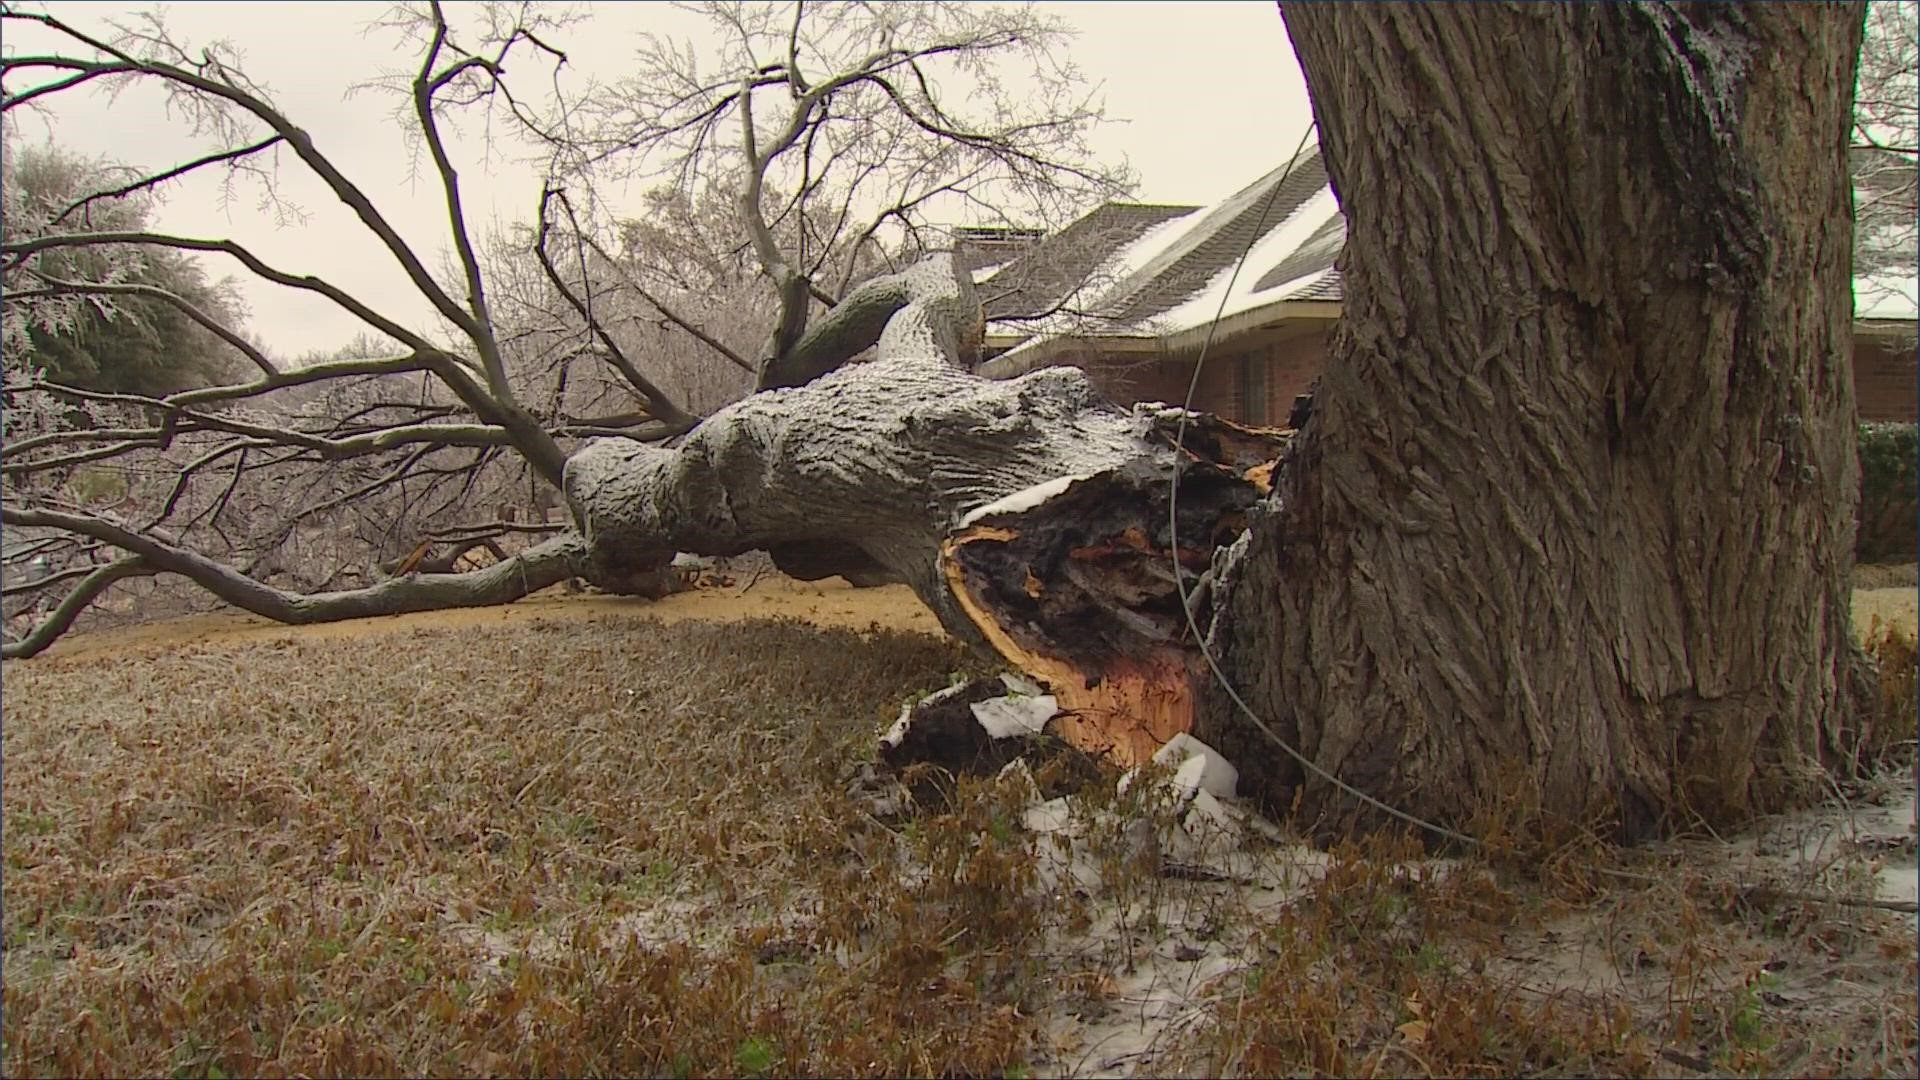 Tree damage is the among the many effects seen by the ice storm in North Texas.